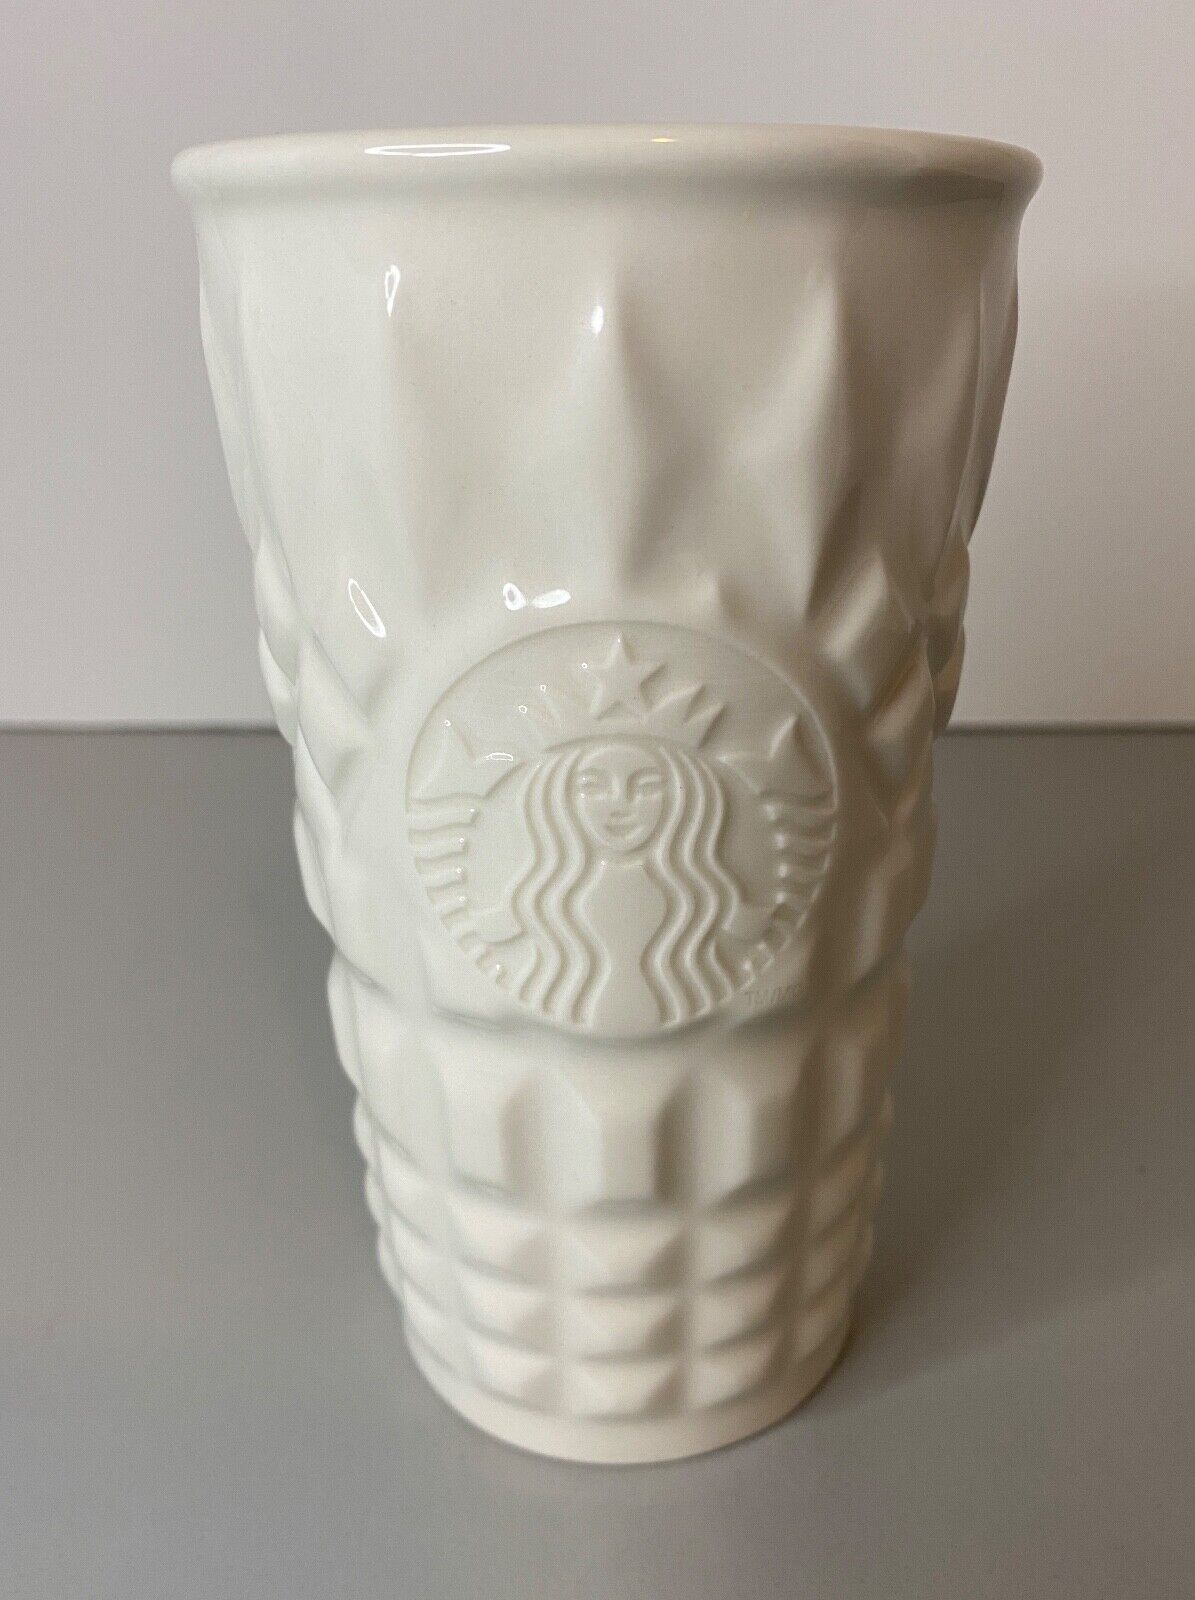 Starbucks White Quilted Ceramic Cup Mug travel Tumbler without Lid 10 oz 2014